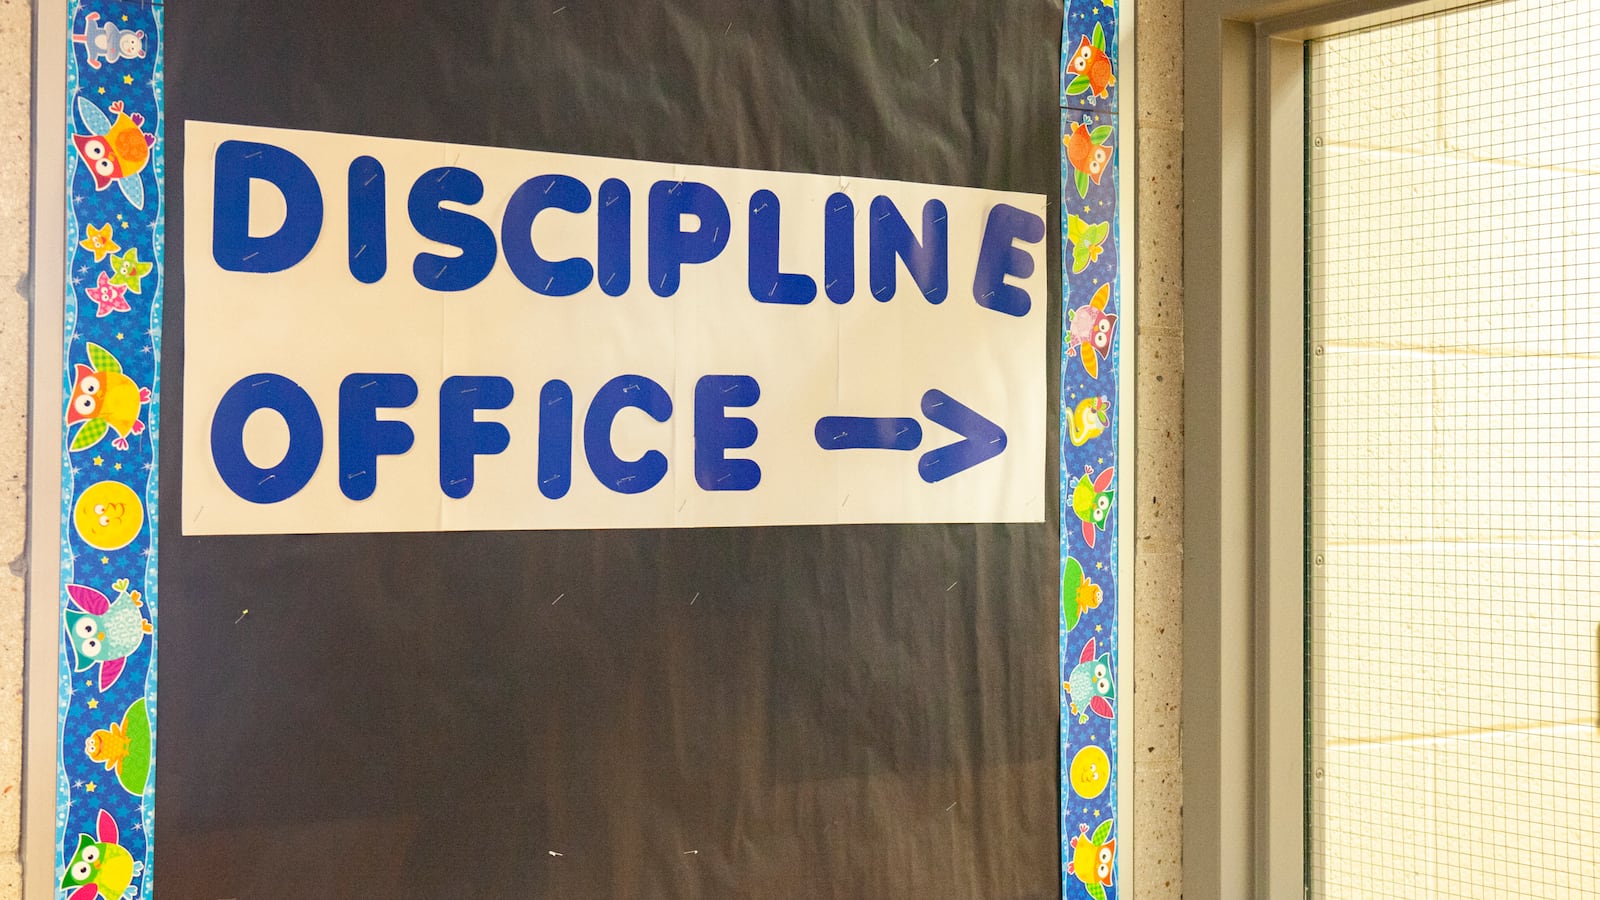 A sign reads “DISCIPLINE OFFICE” on a board with black paper next to a school office’s windows.